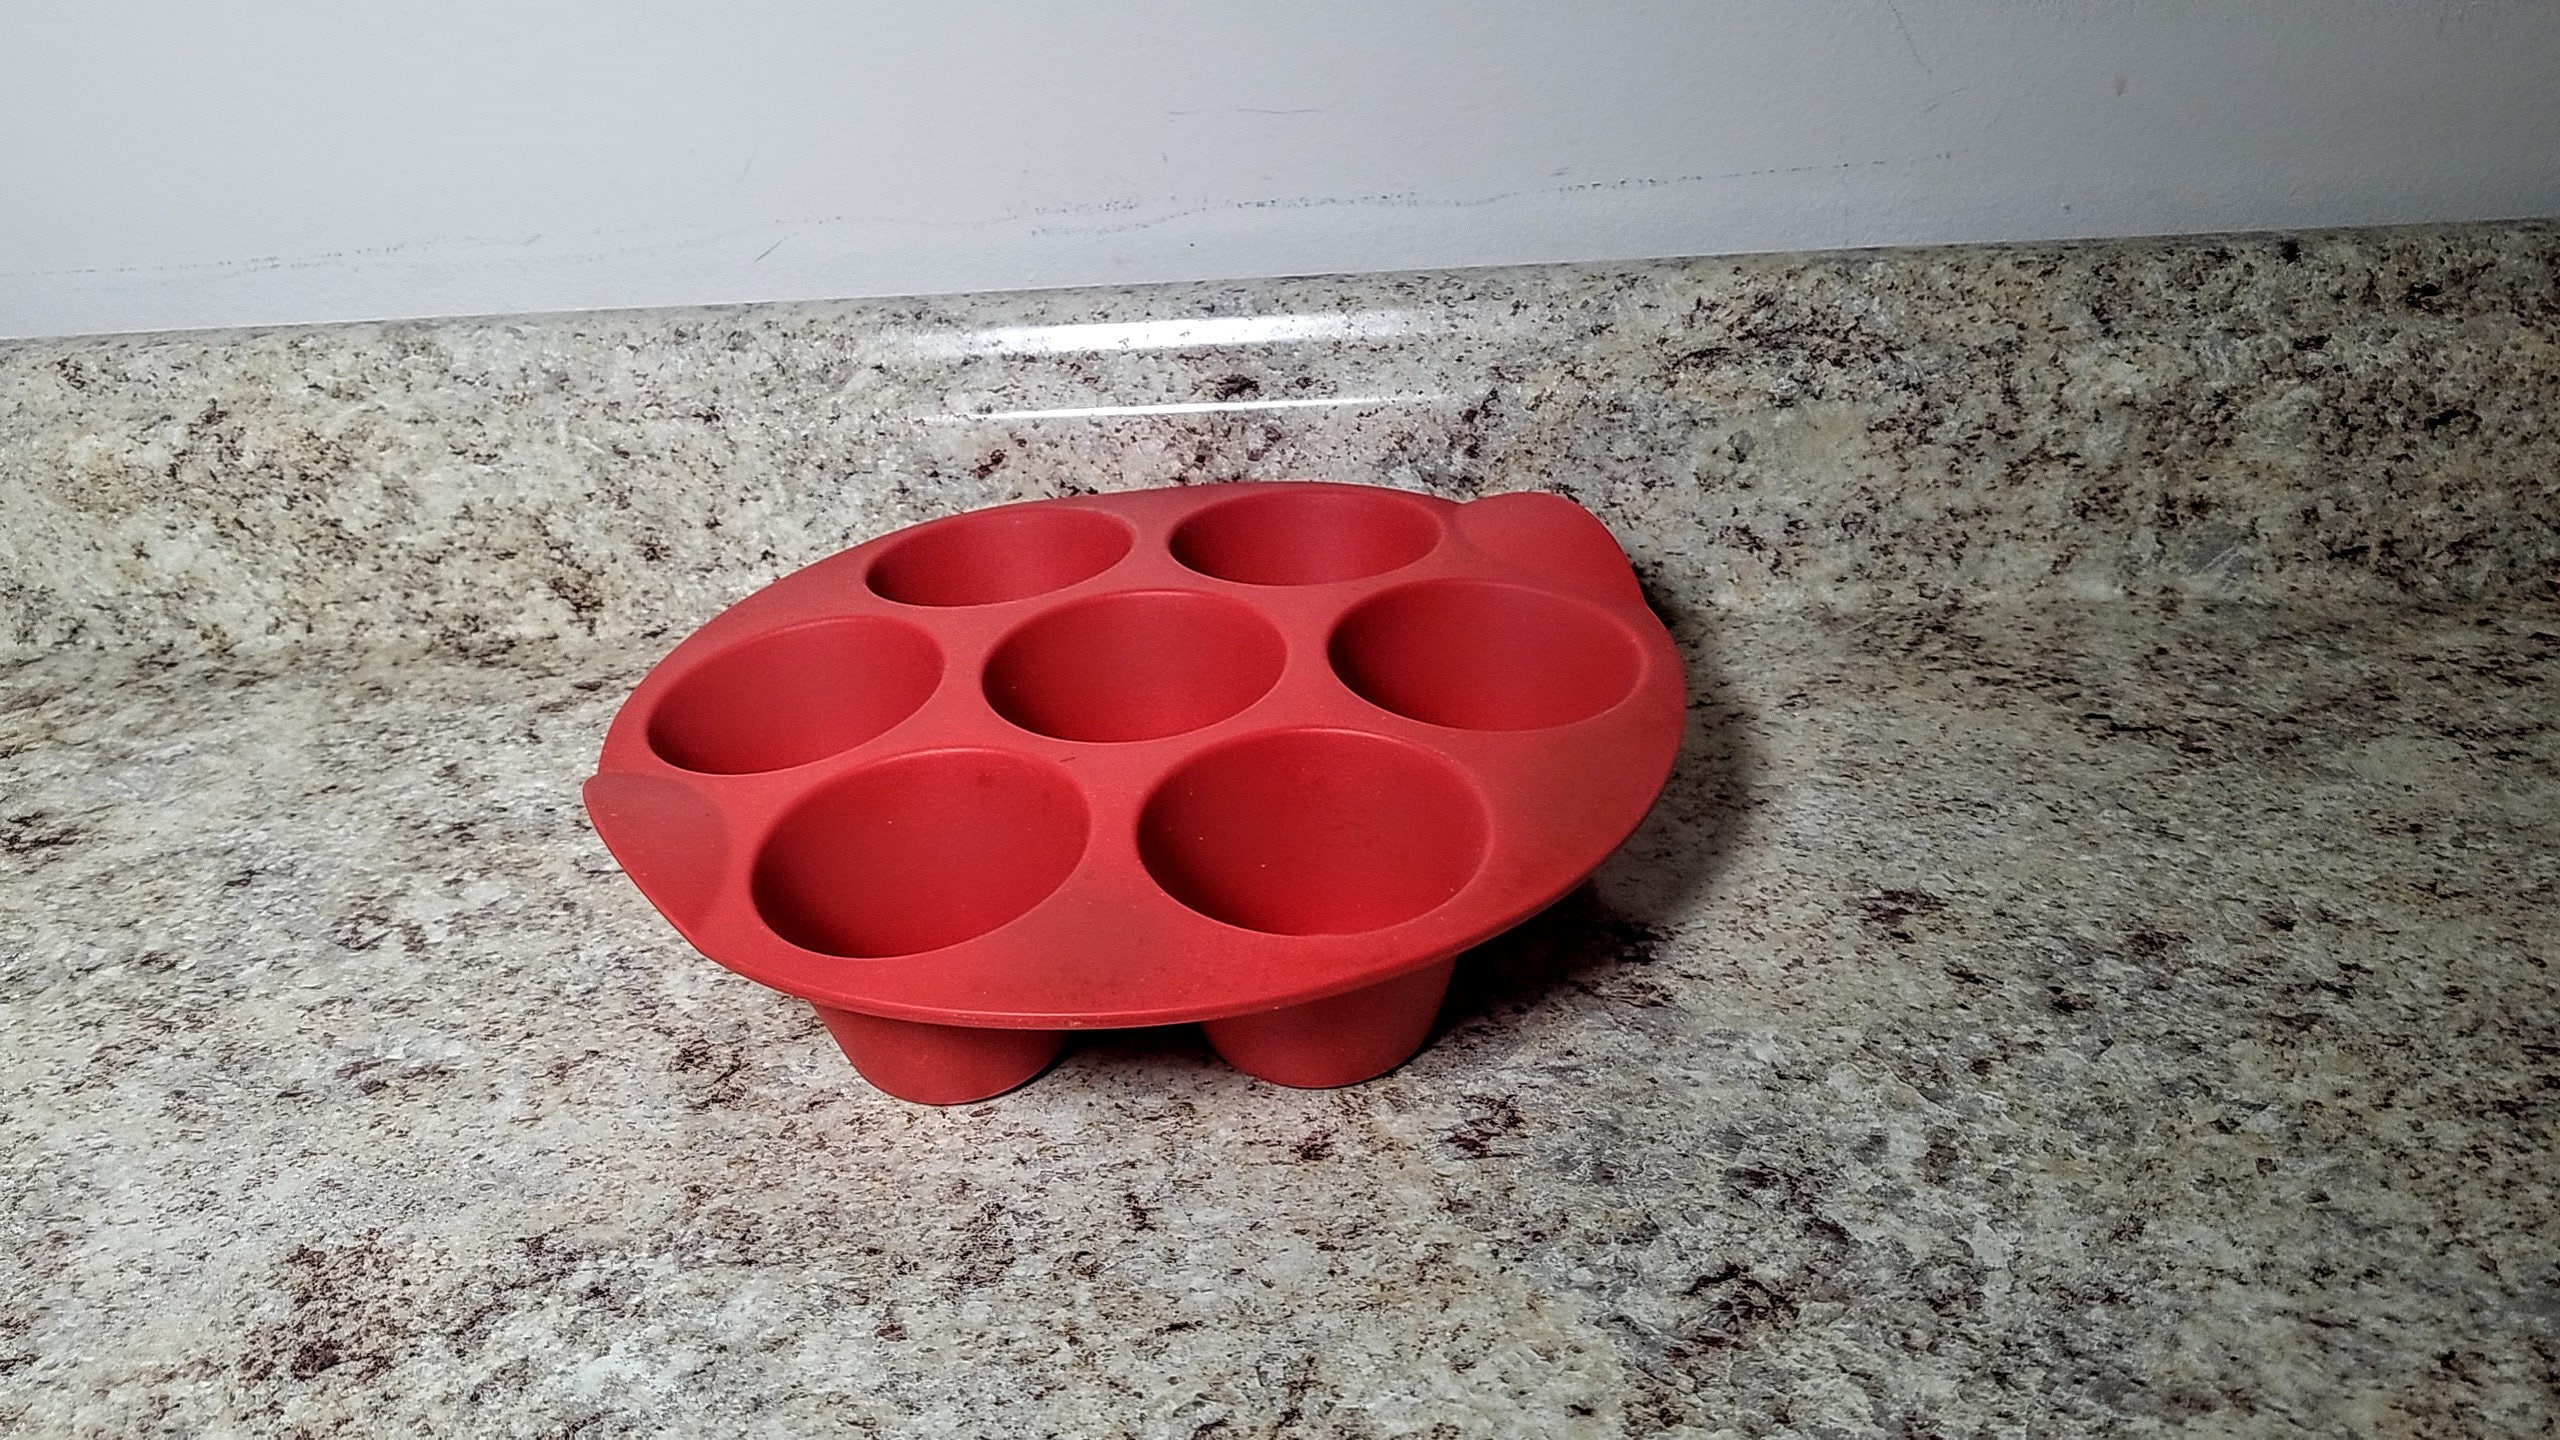 Tupperware Nordic - Take out your Silicone Cupcake Form this